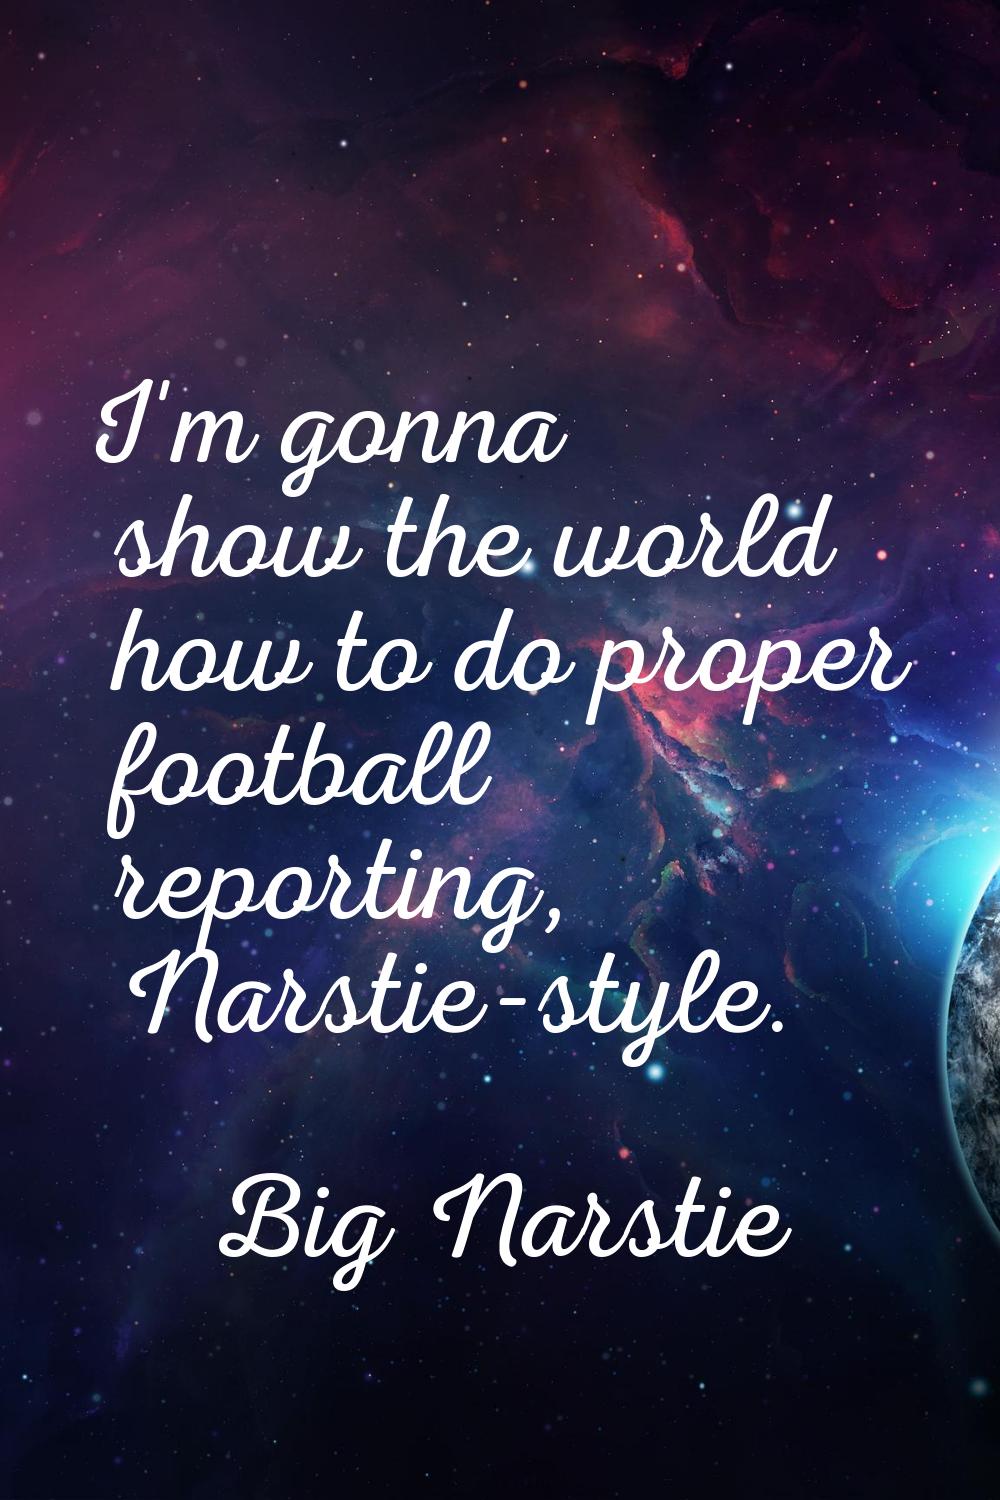 I'm gonna show the world how to do proper football reporting, Narstie-style.